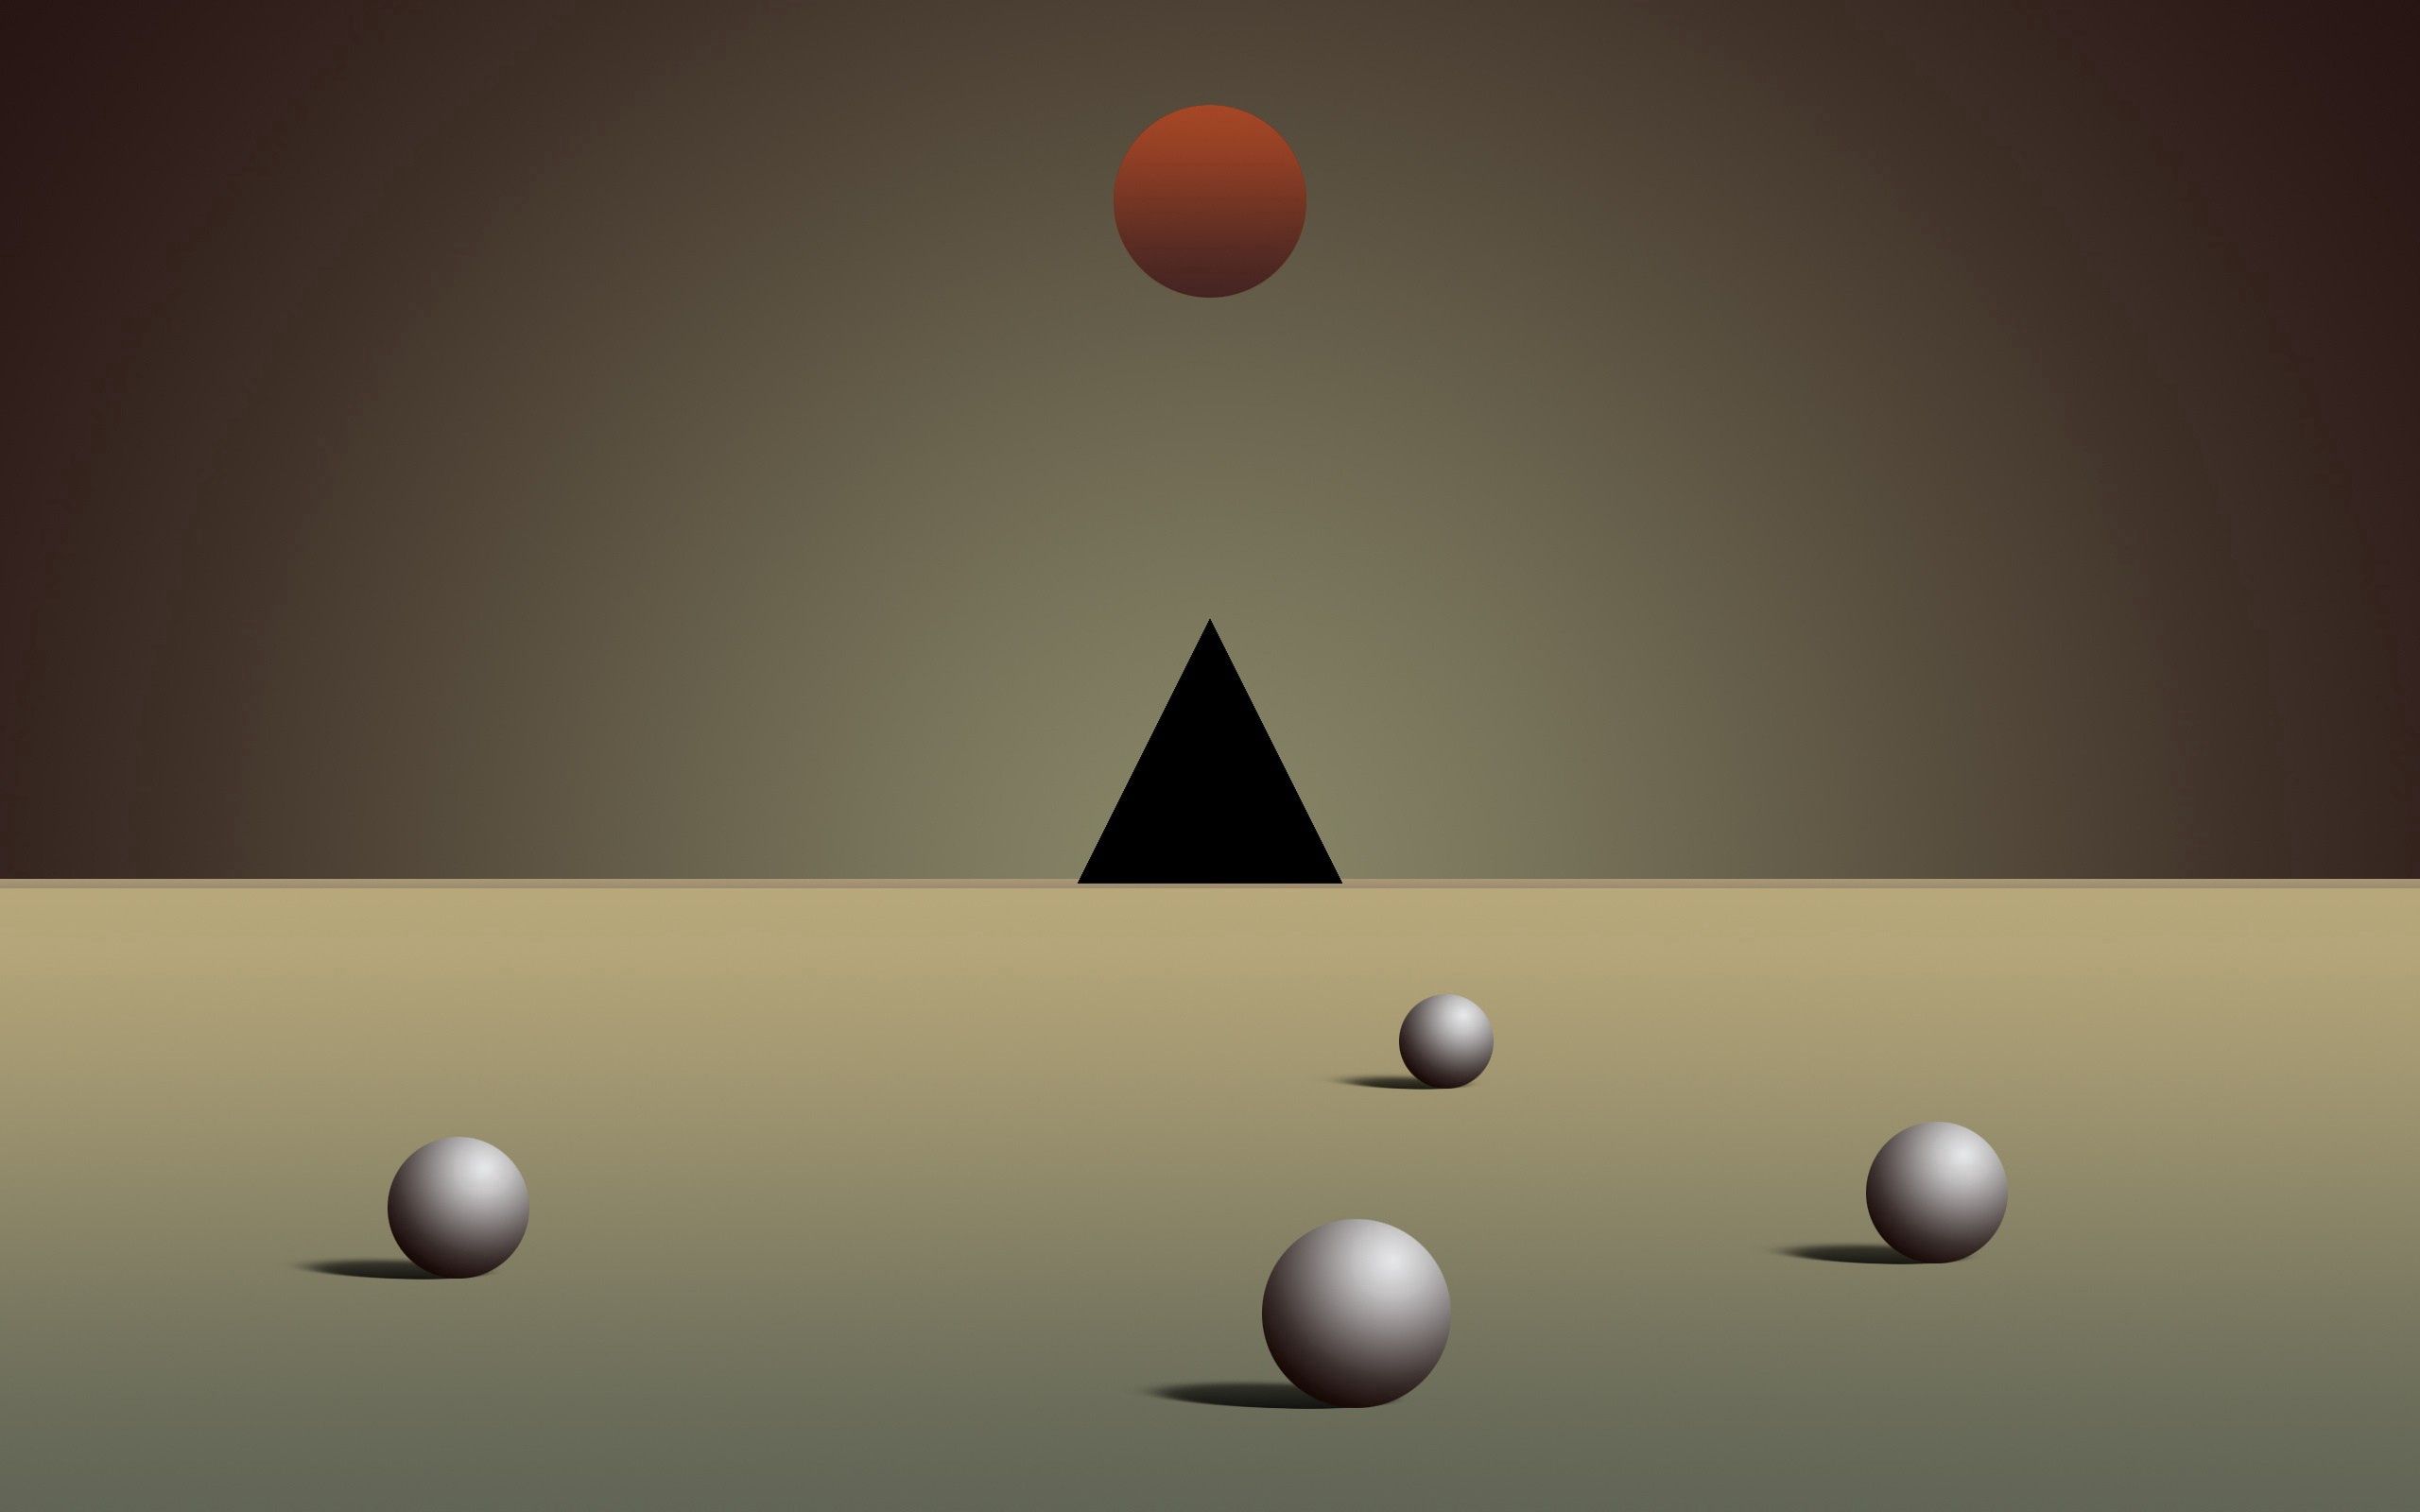 android figurines, background, abstract, ball, figures, triangle